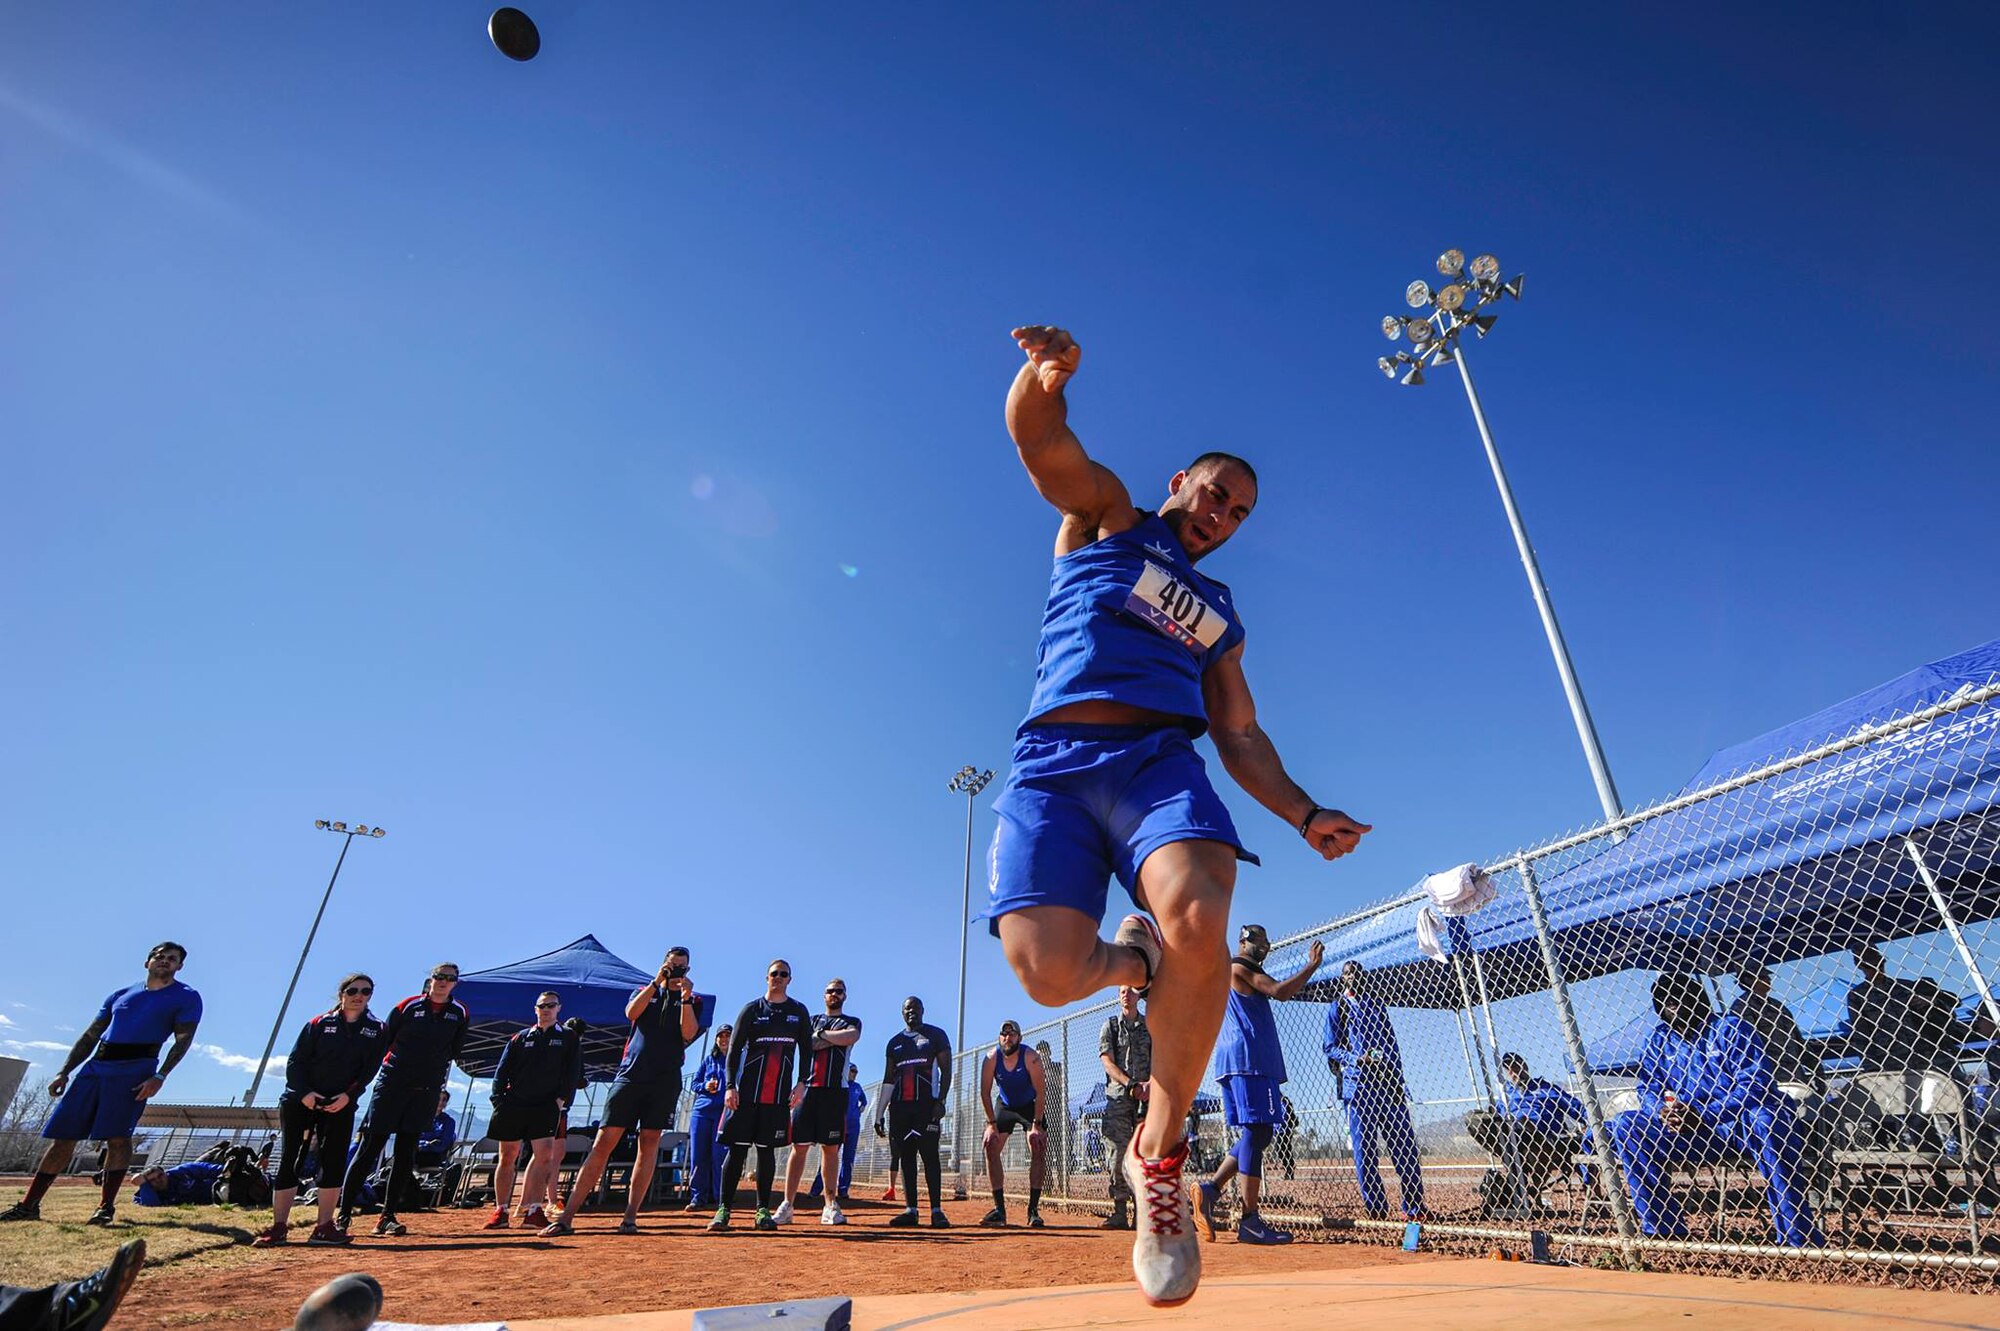 An Air Force Wounded Warrior Trials competitor throws a shotput during the field competition of the AFW2 at Nellis Air Force Base, Nev., Feb. 28, 2017. AFW2 focuses on specific personal and family needs and includes programs to address a gamut of situations throughout the recovery process. (U.S. Air Force photo by Airman 1st Class Kevin Tanenbaum/Released)